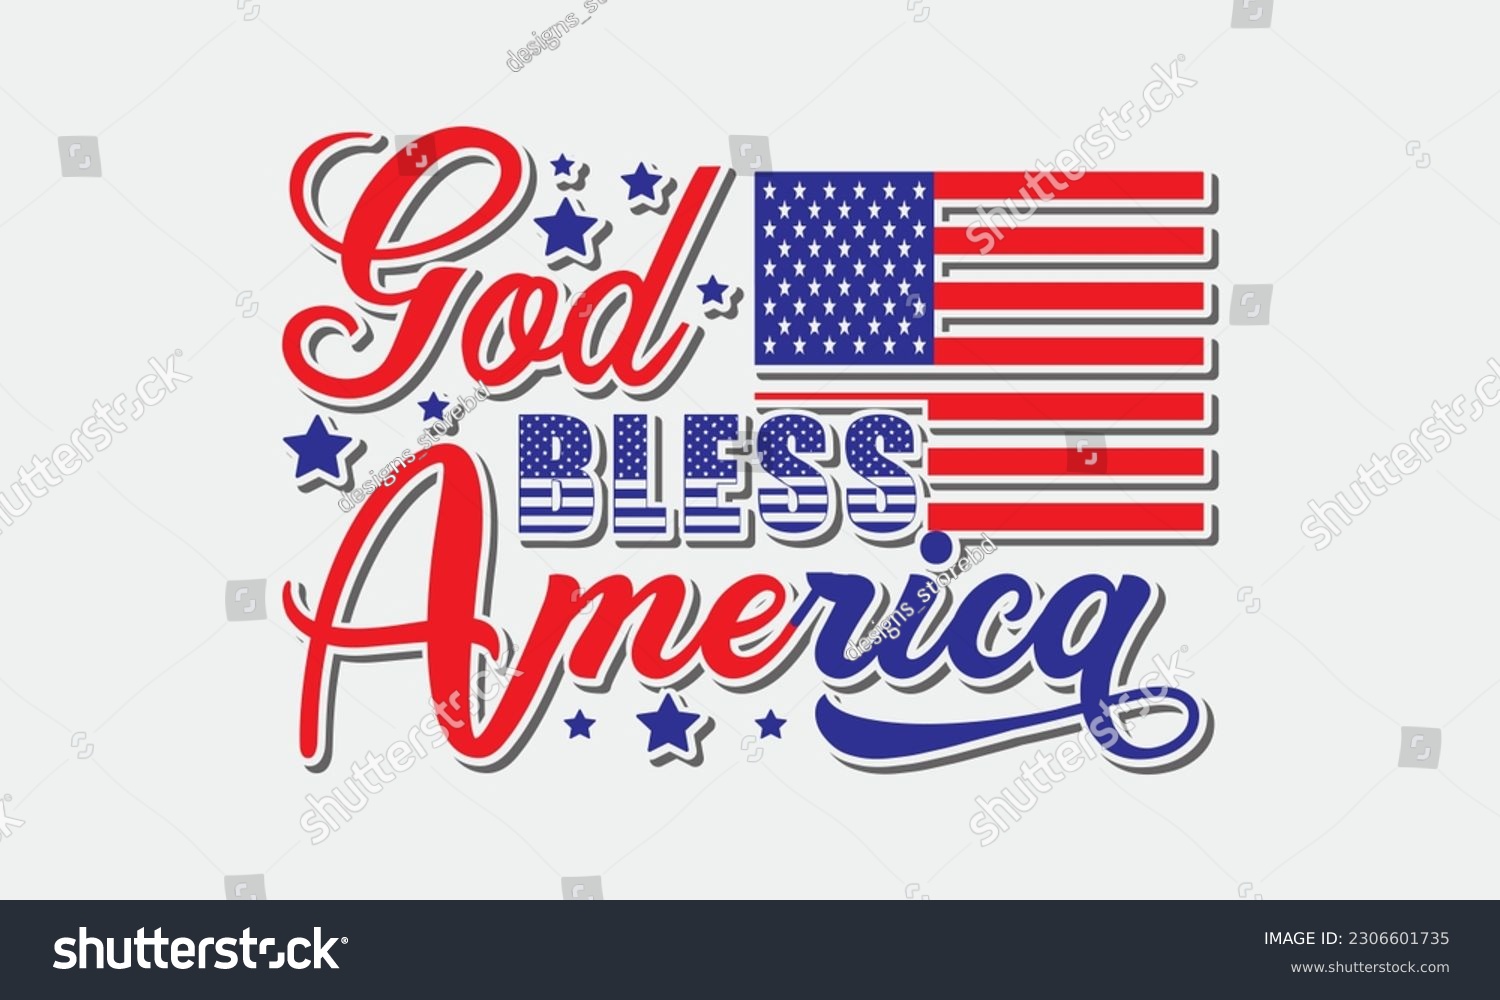 SVG of God bless america svg, 4th of July svg, Patriotic , Happy 4th Of July, America shirt , Fourth of July, independence day usa memorial day typography tshirt design vector file svg